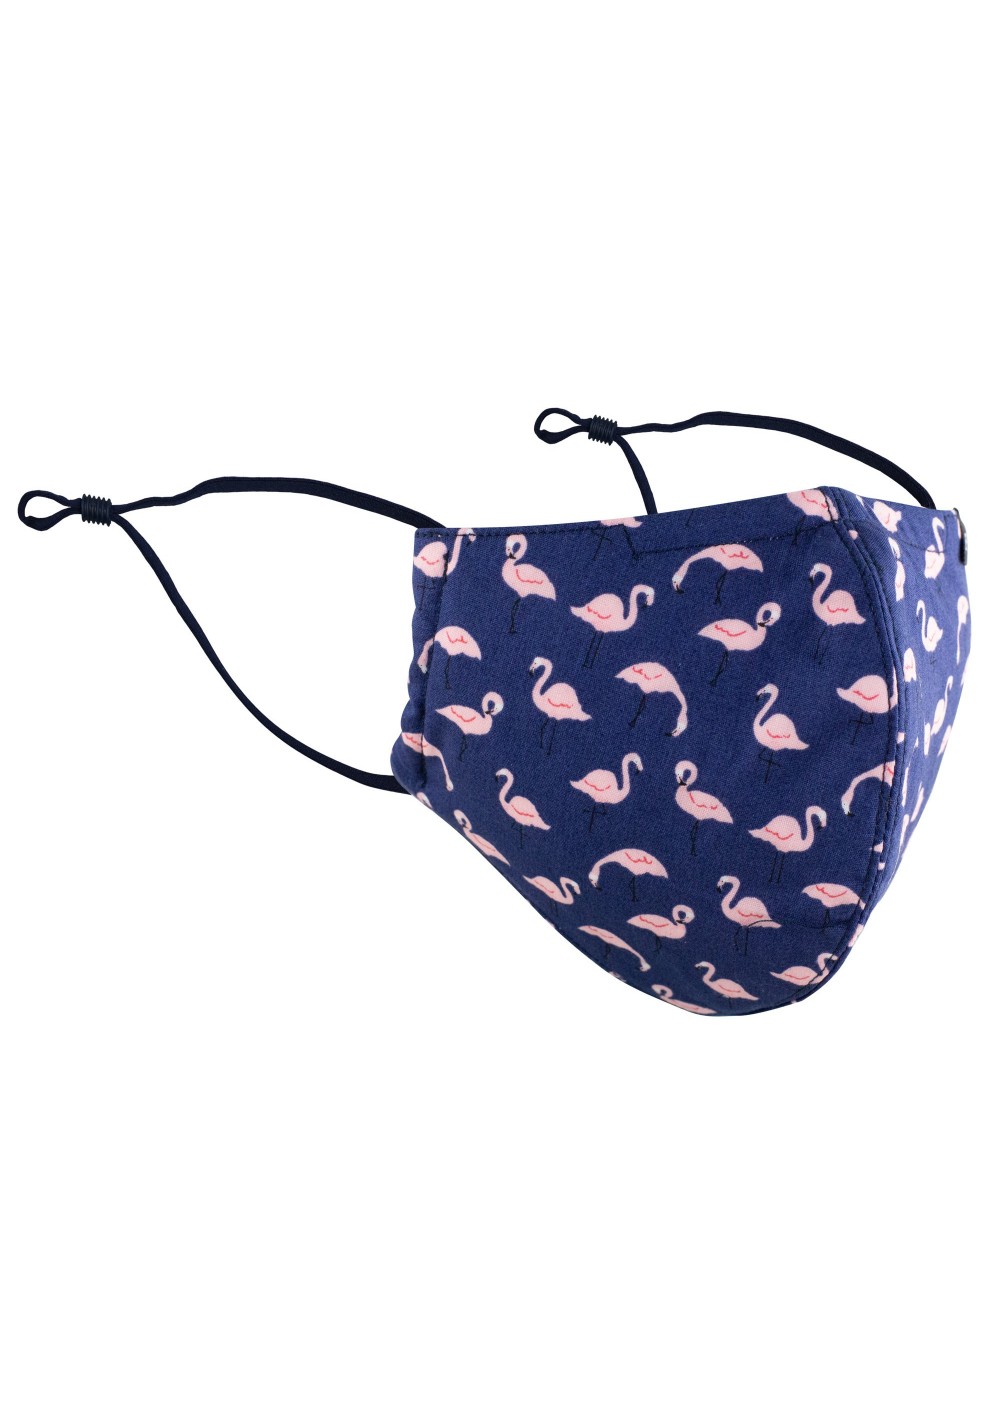 flamingo print face mask in 100% cotton